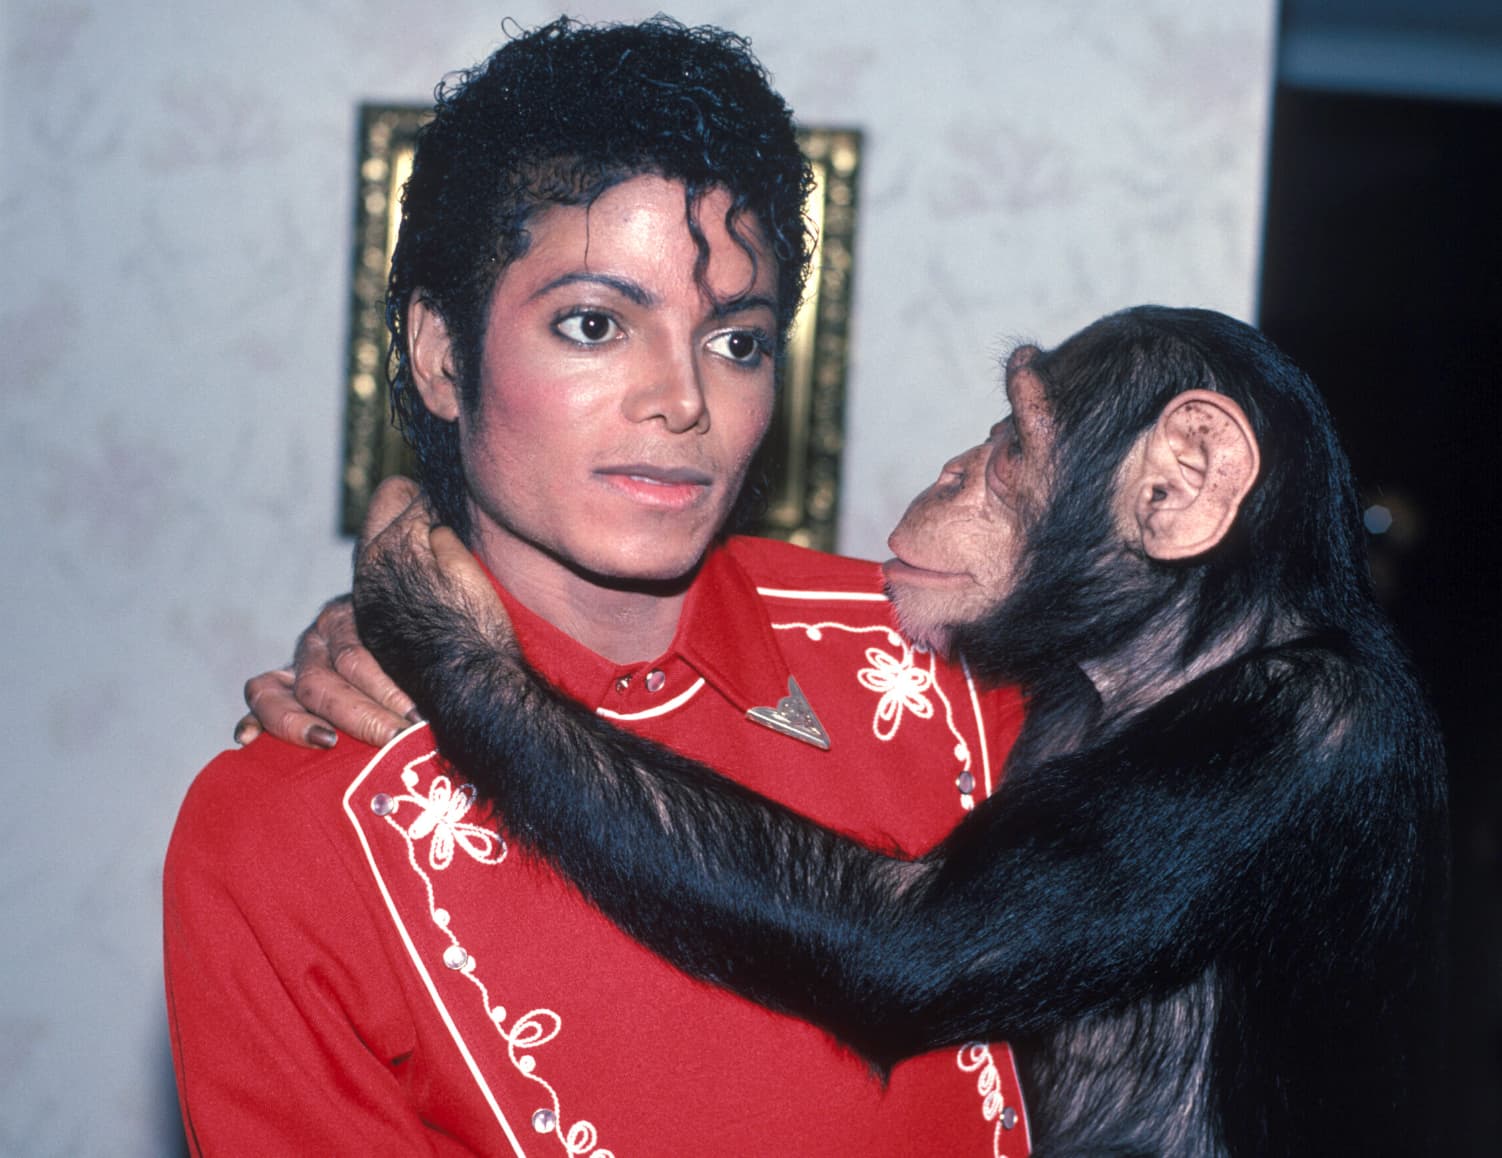  “TIL that Michael Jackson's chimpanzee 'Bubbles' is still alive at 40 years old and living in Florida.”